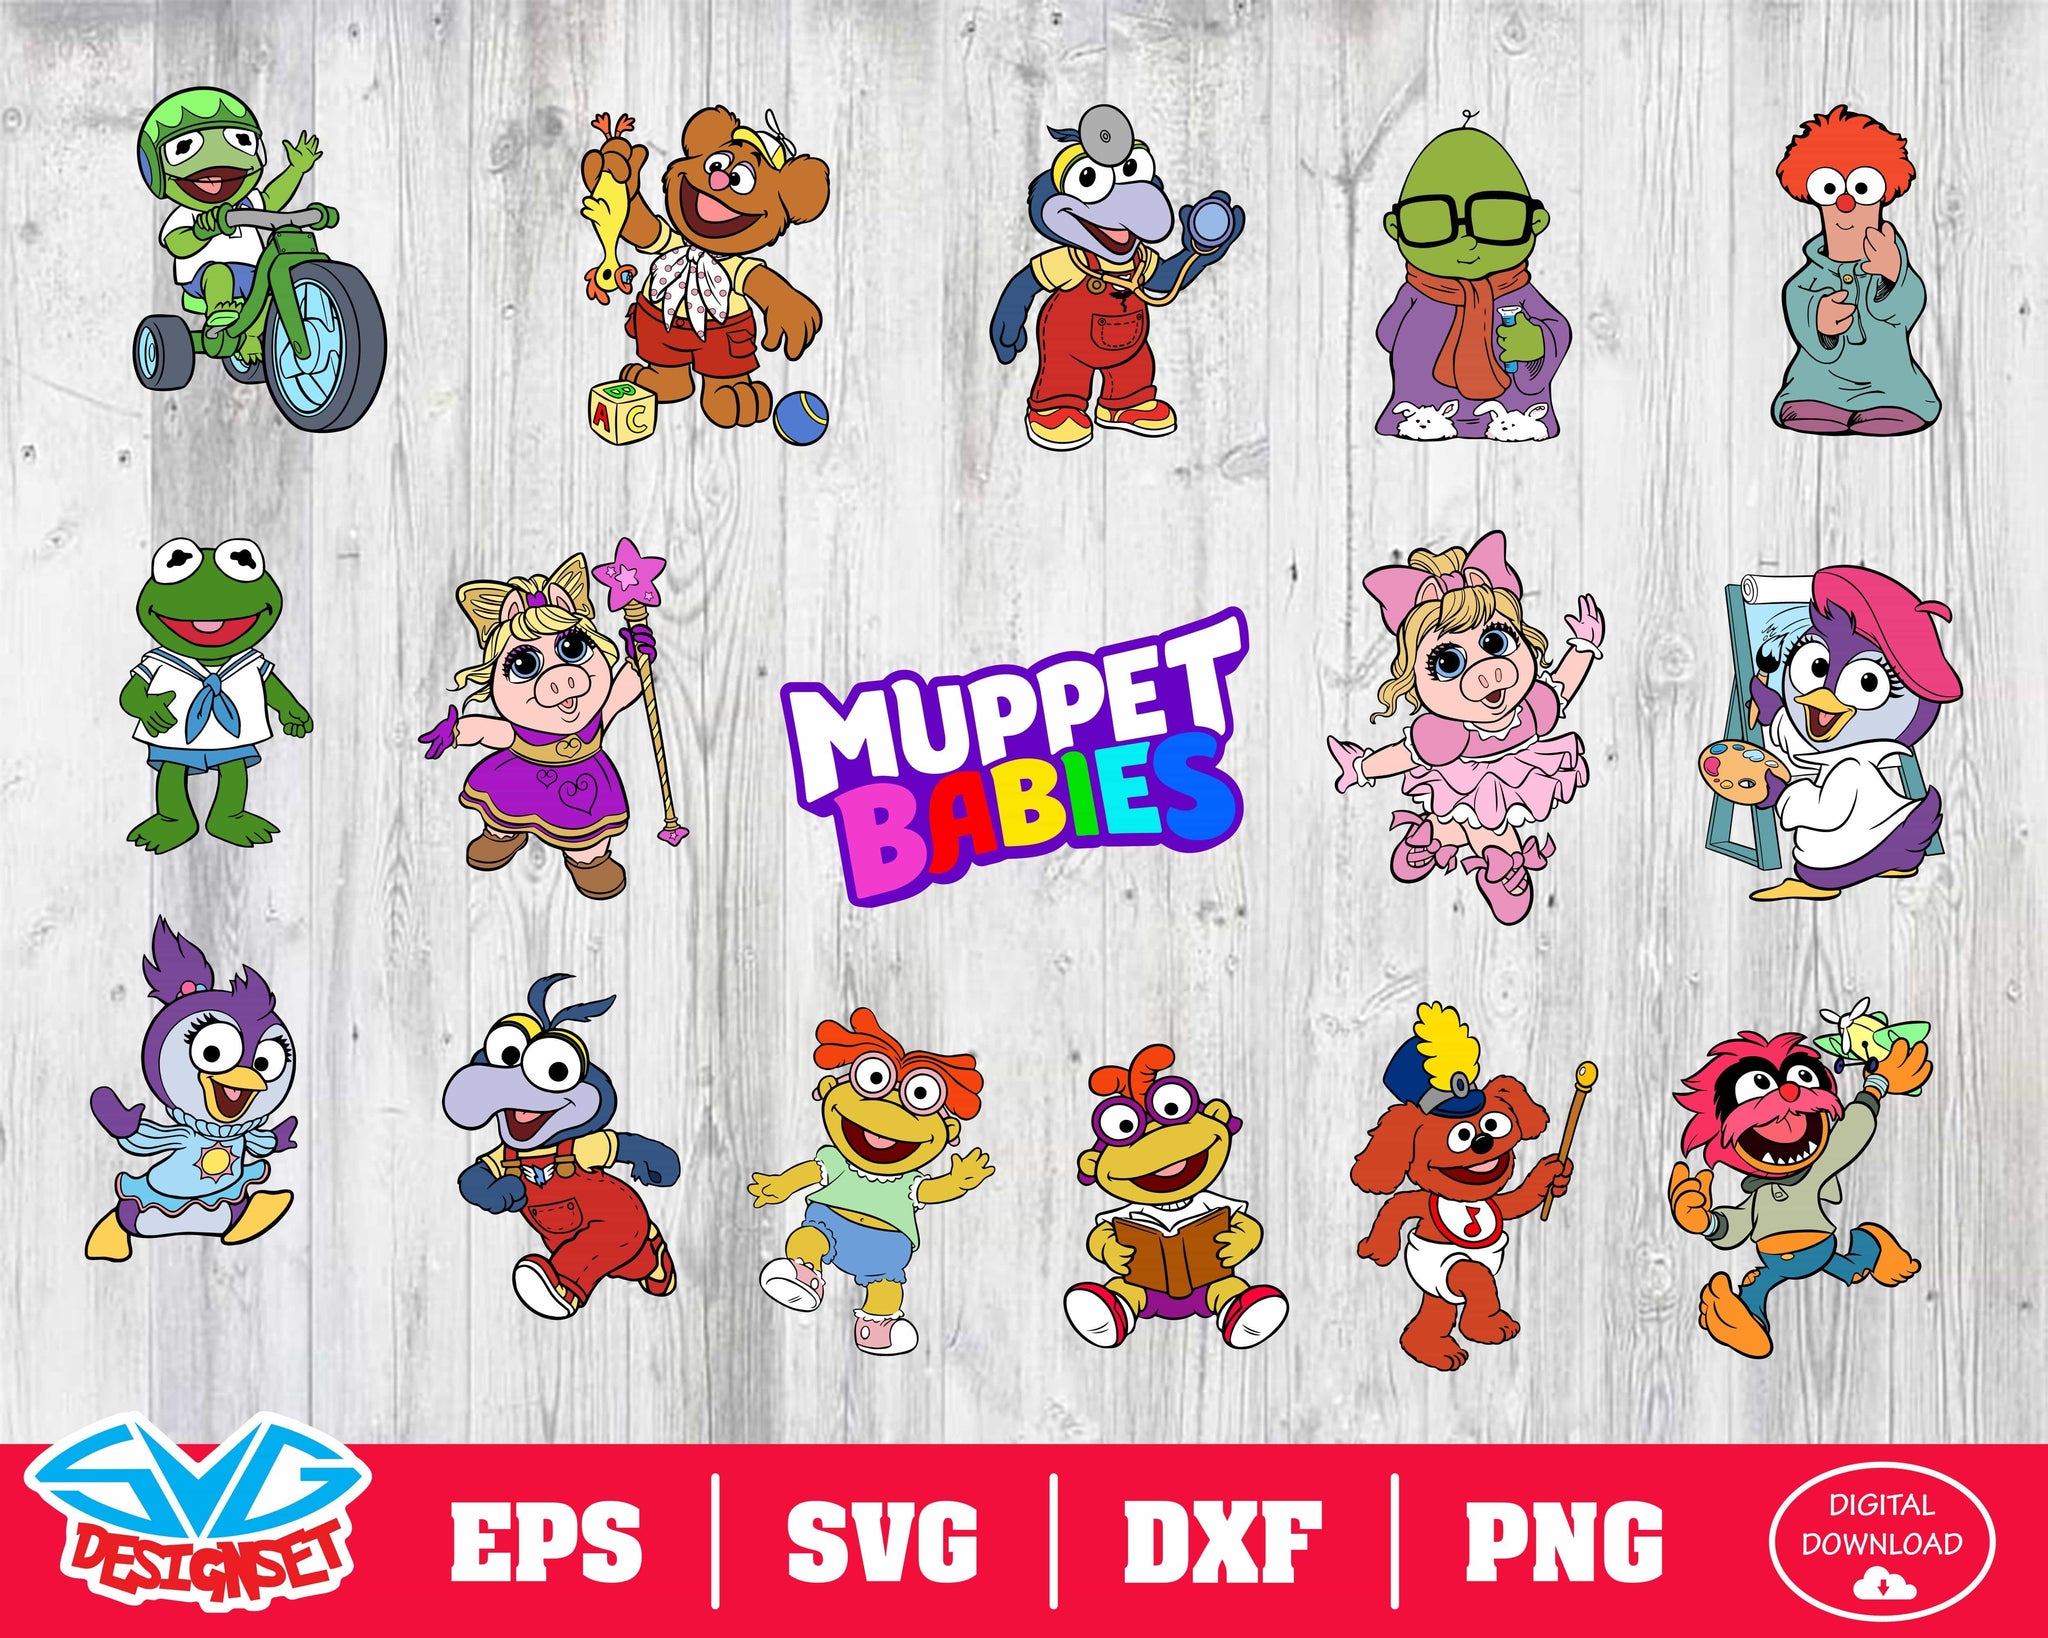 Muppeys babies Svg, Dxf, Eps, Png, Clipart, Silhouette and Cutfiles #2 - SVGDesignSets